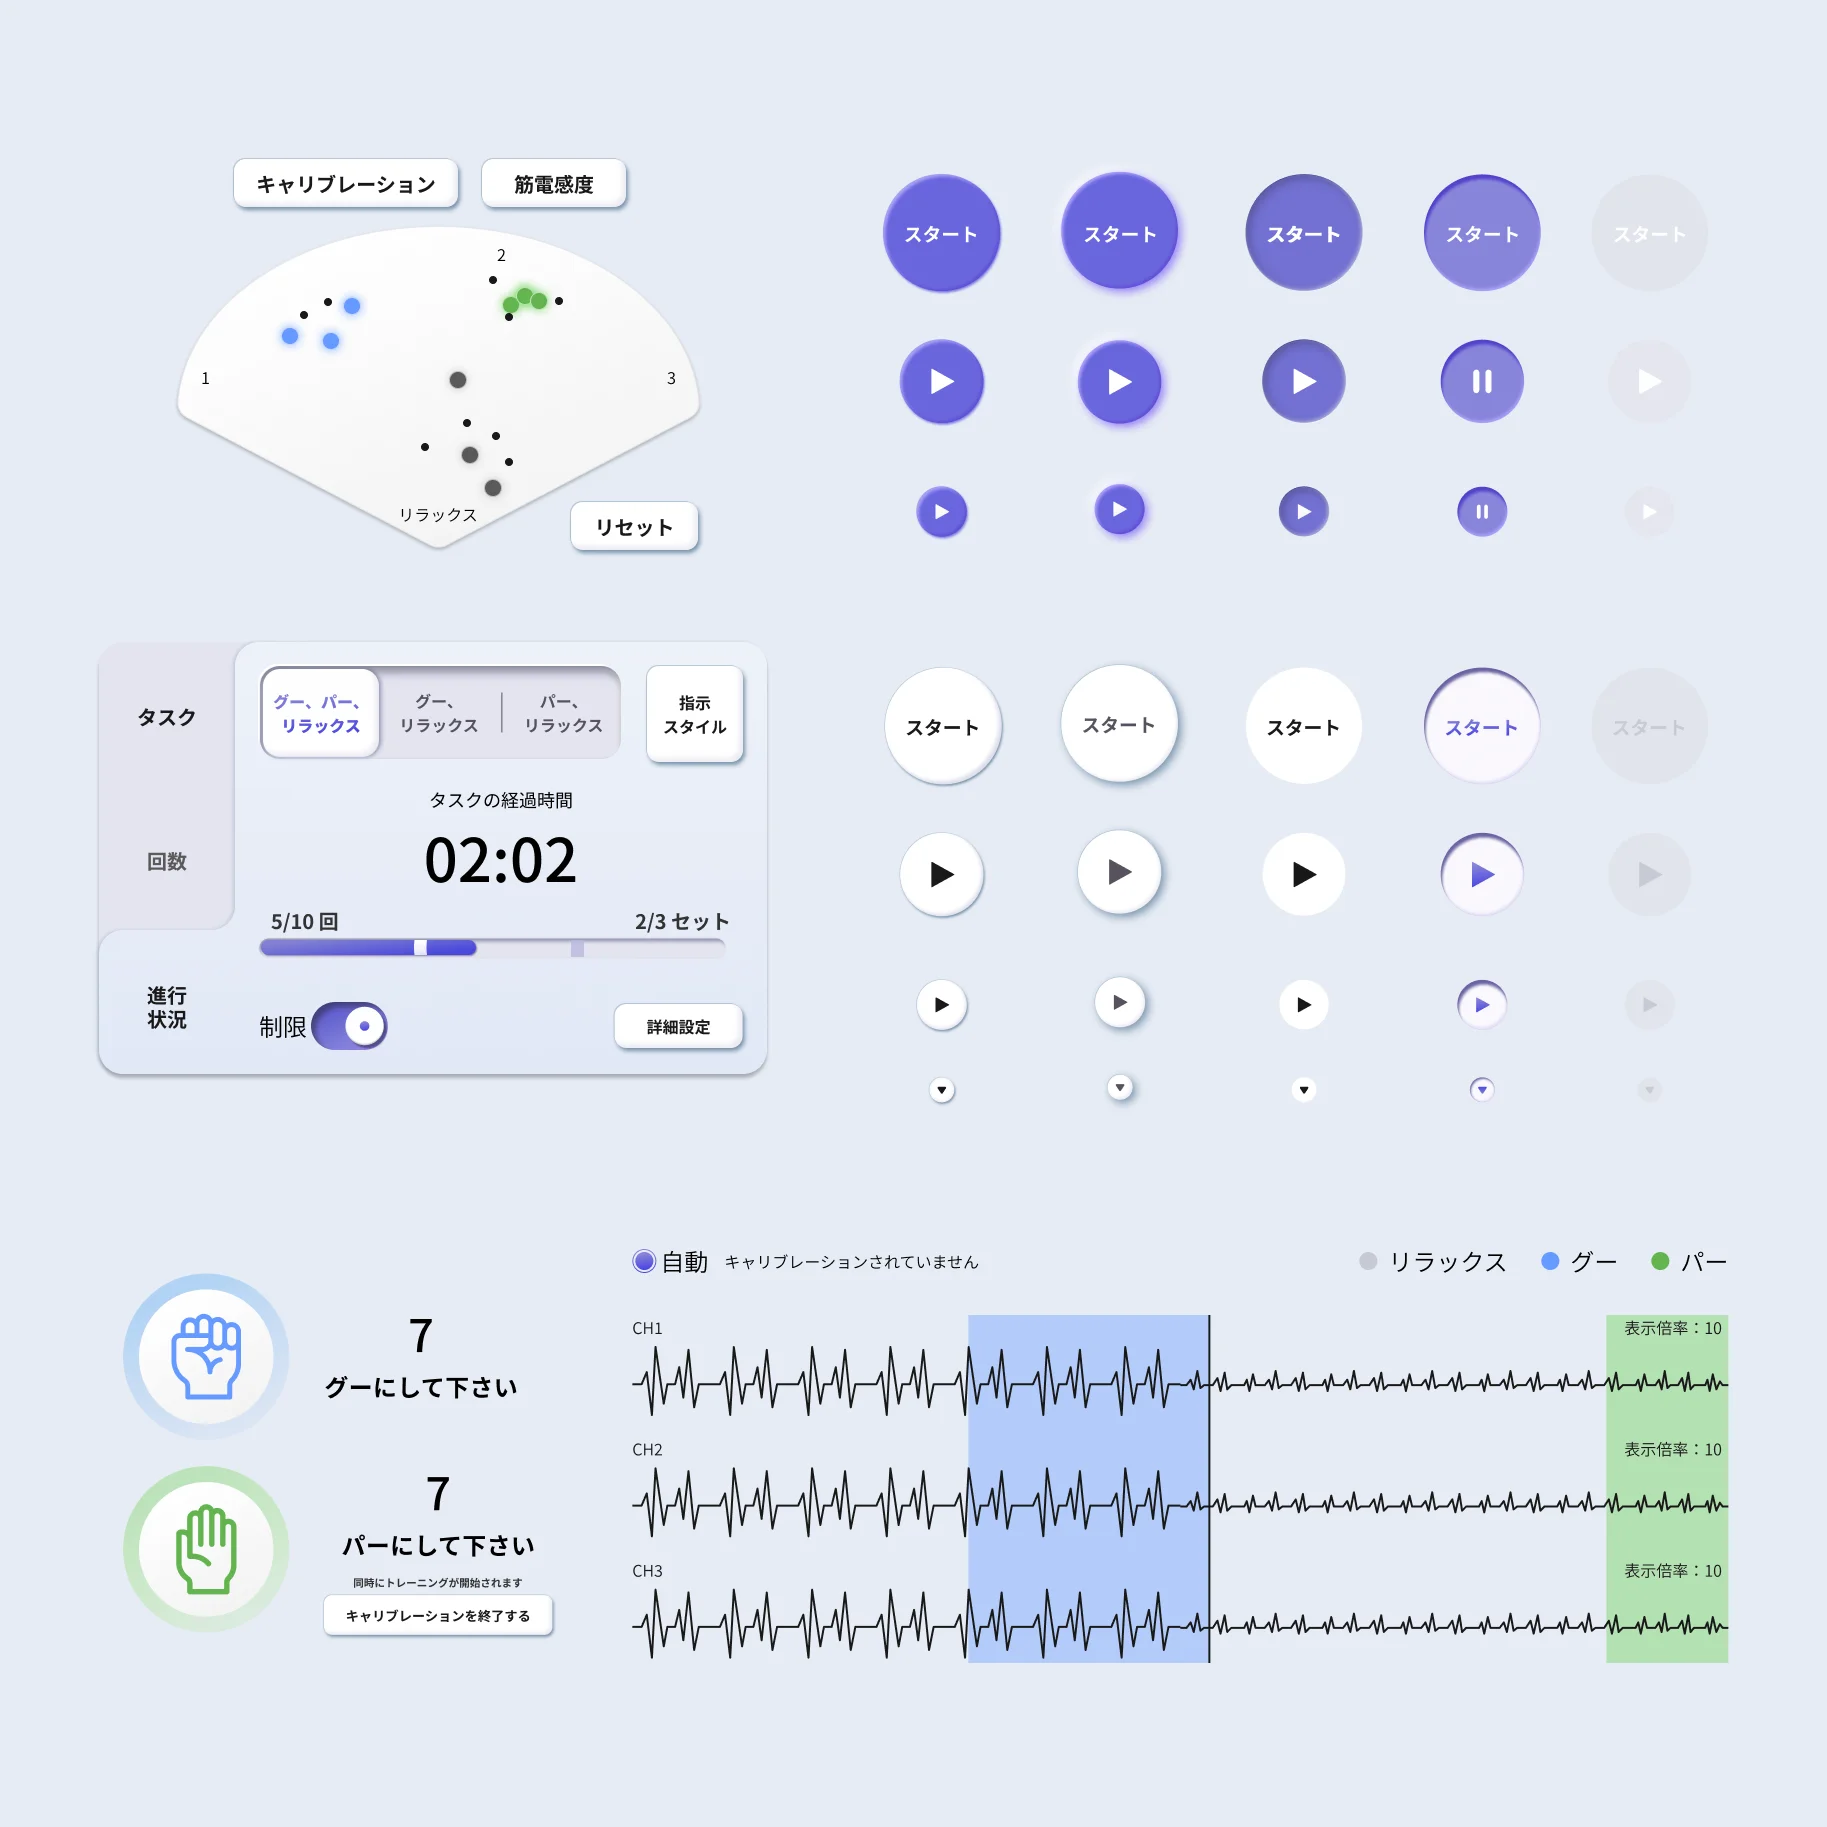 Some design system components for the medical device's software user interface